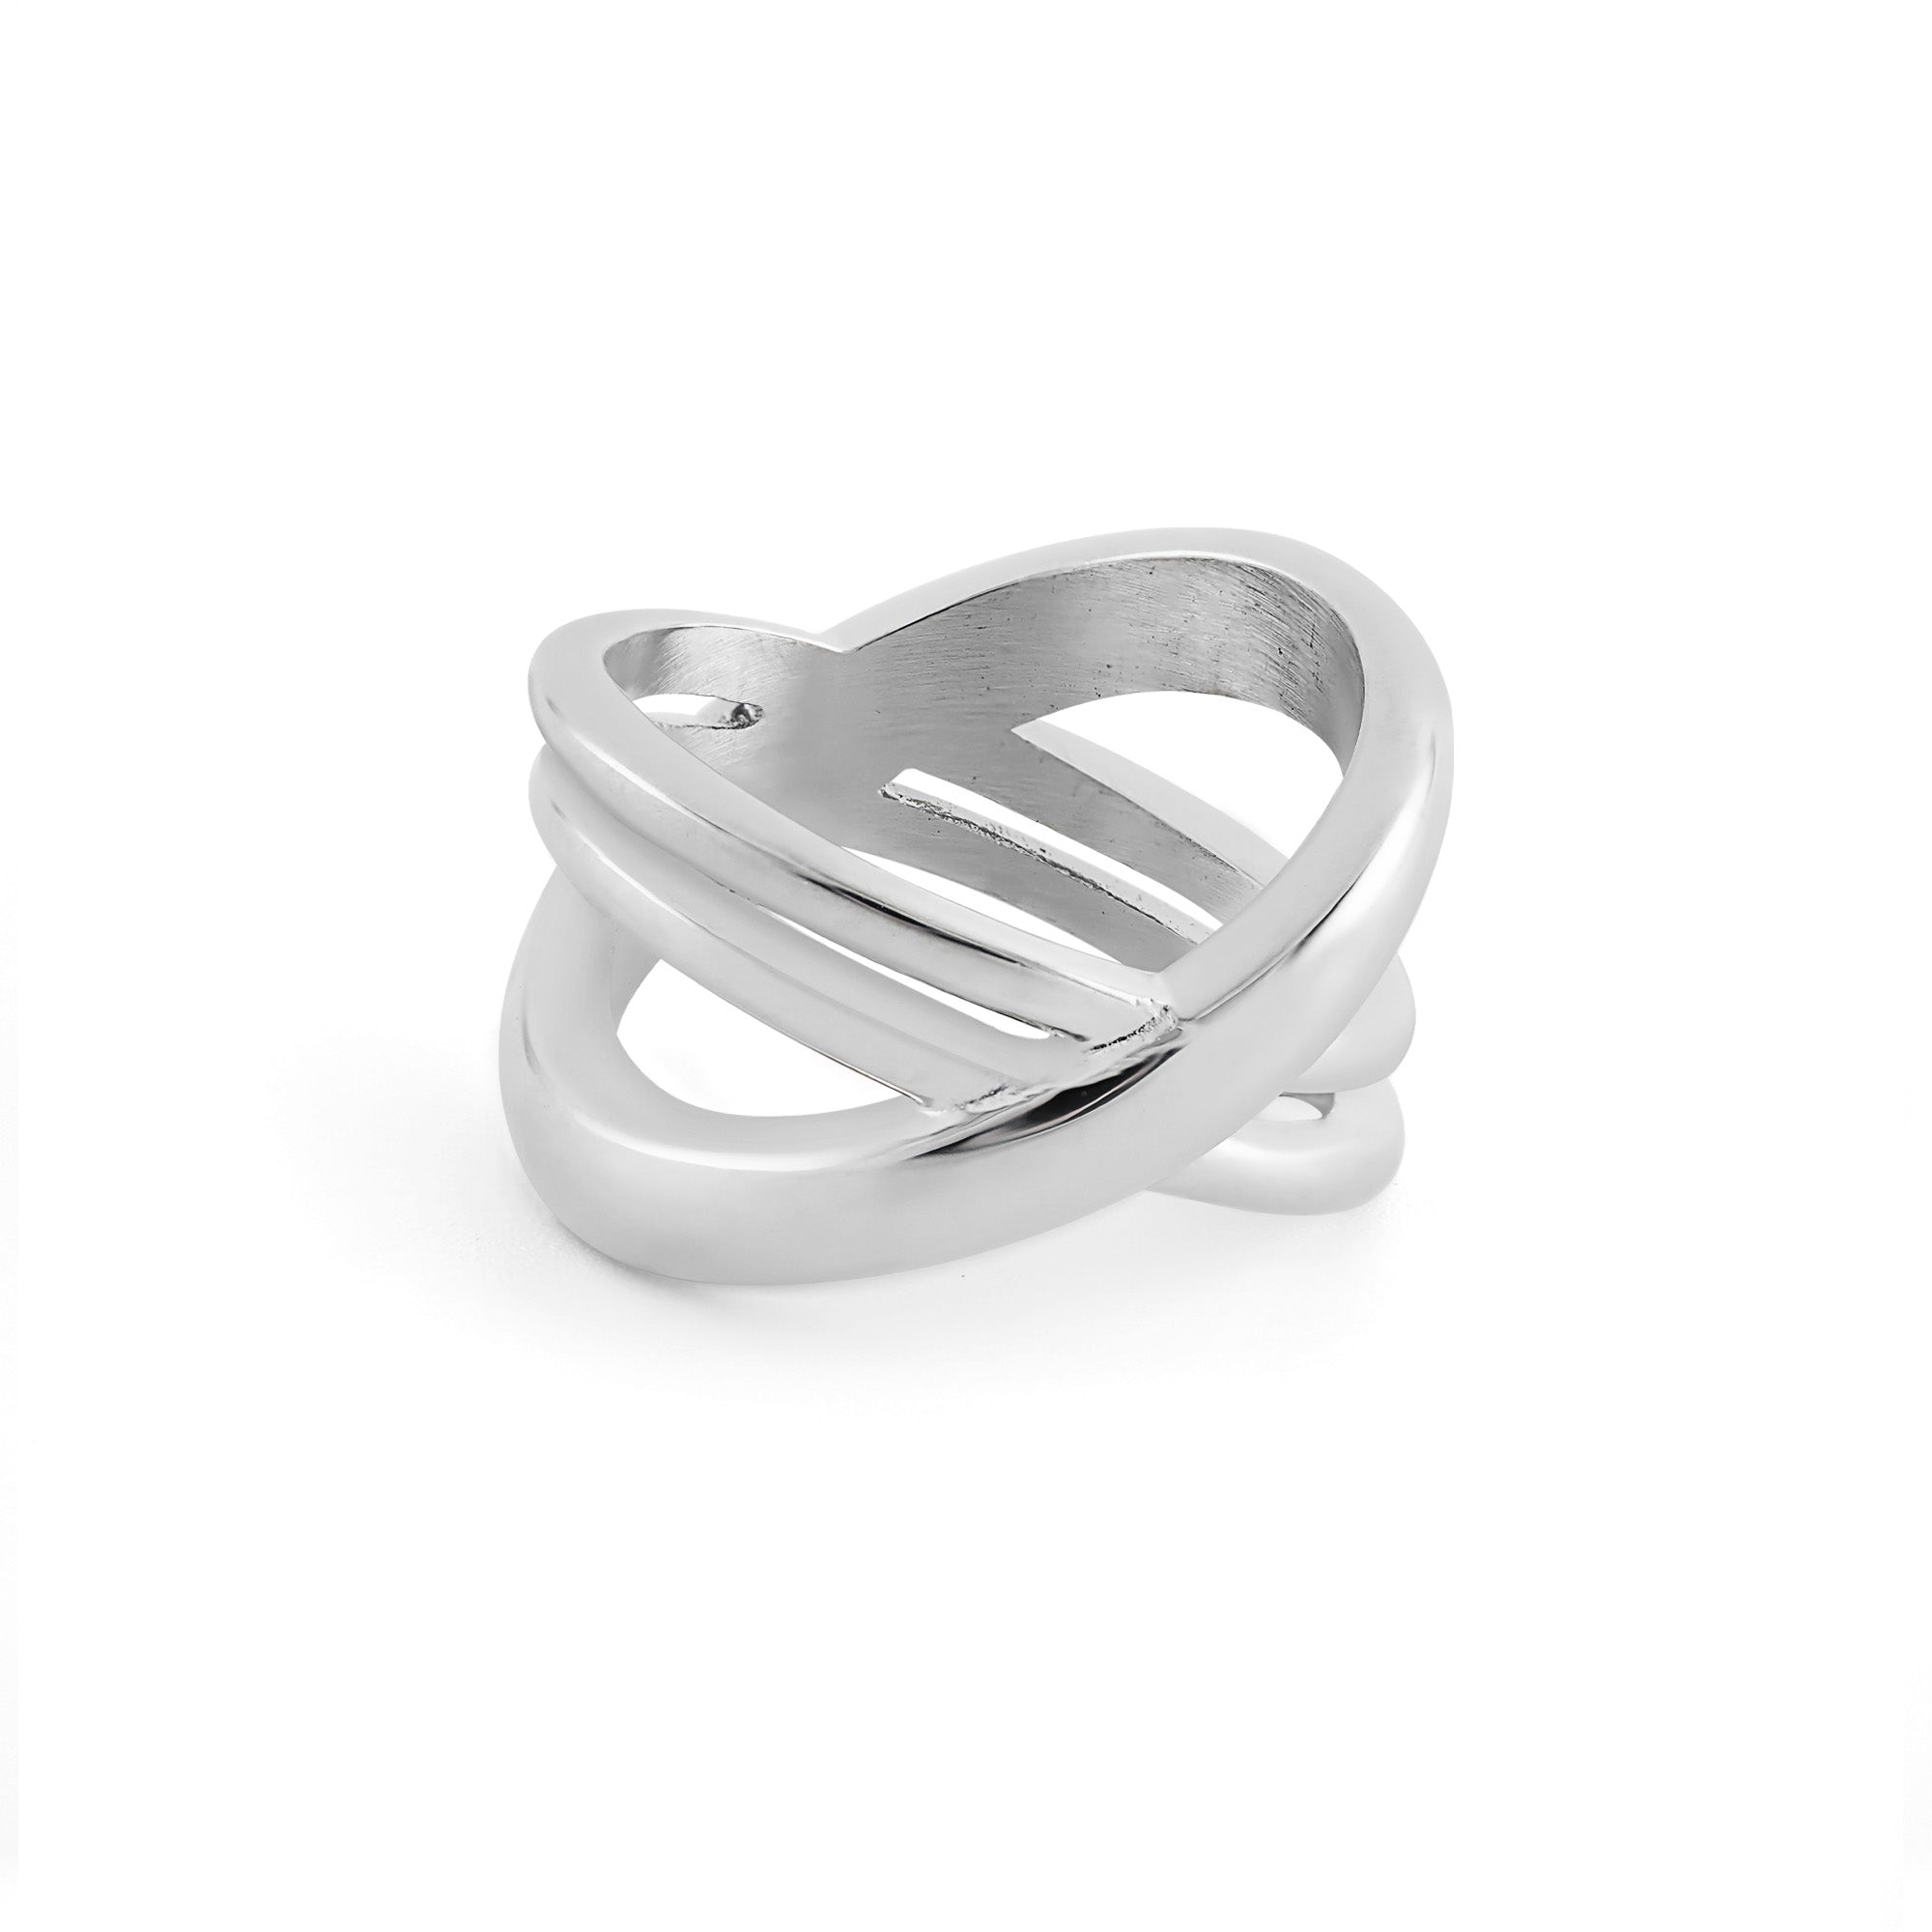 Dusk women's ring by Five Jwlry, part of Alicia Moffet's visionary collaboration. Featuring a captivating triple crisscross design for a bold take on classic style. Available in 14k gold or silver, crafted from water-resistant 316L stainless steel. Hypoallergenic with a 2-year warranty.